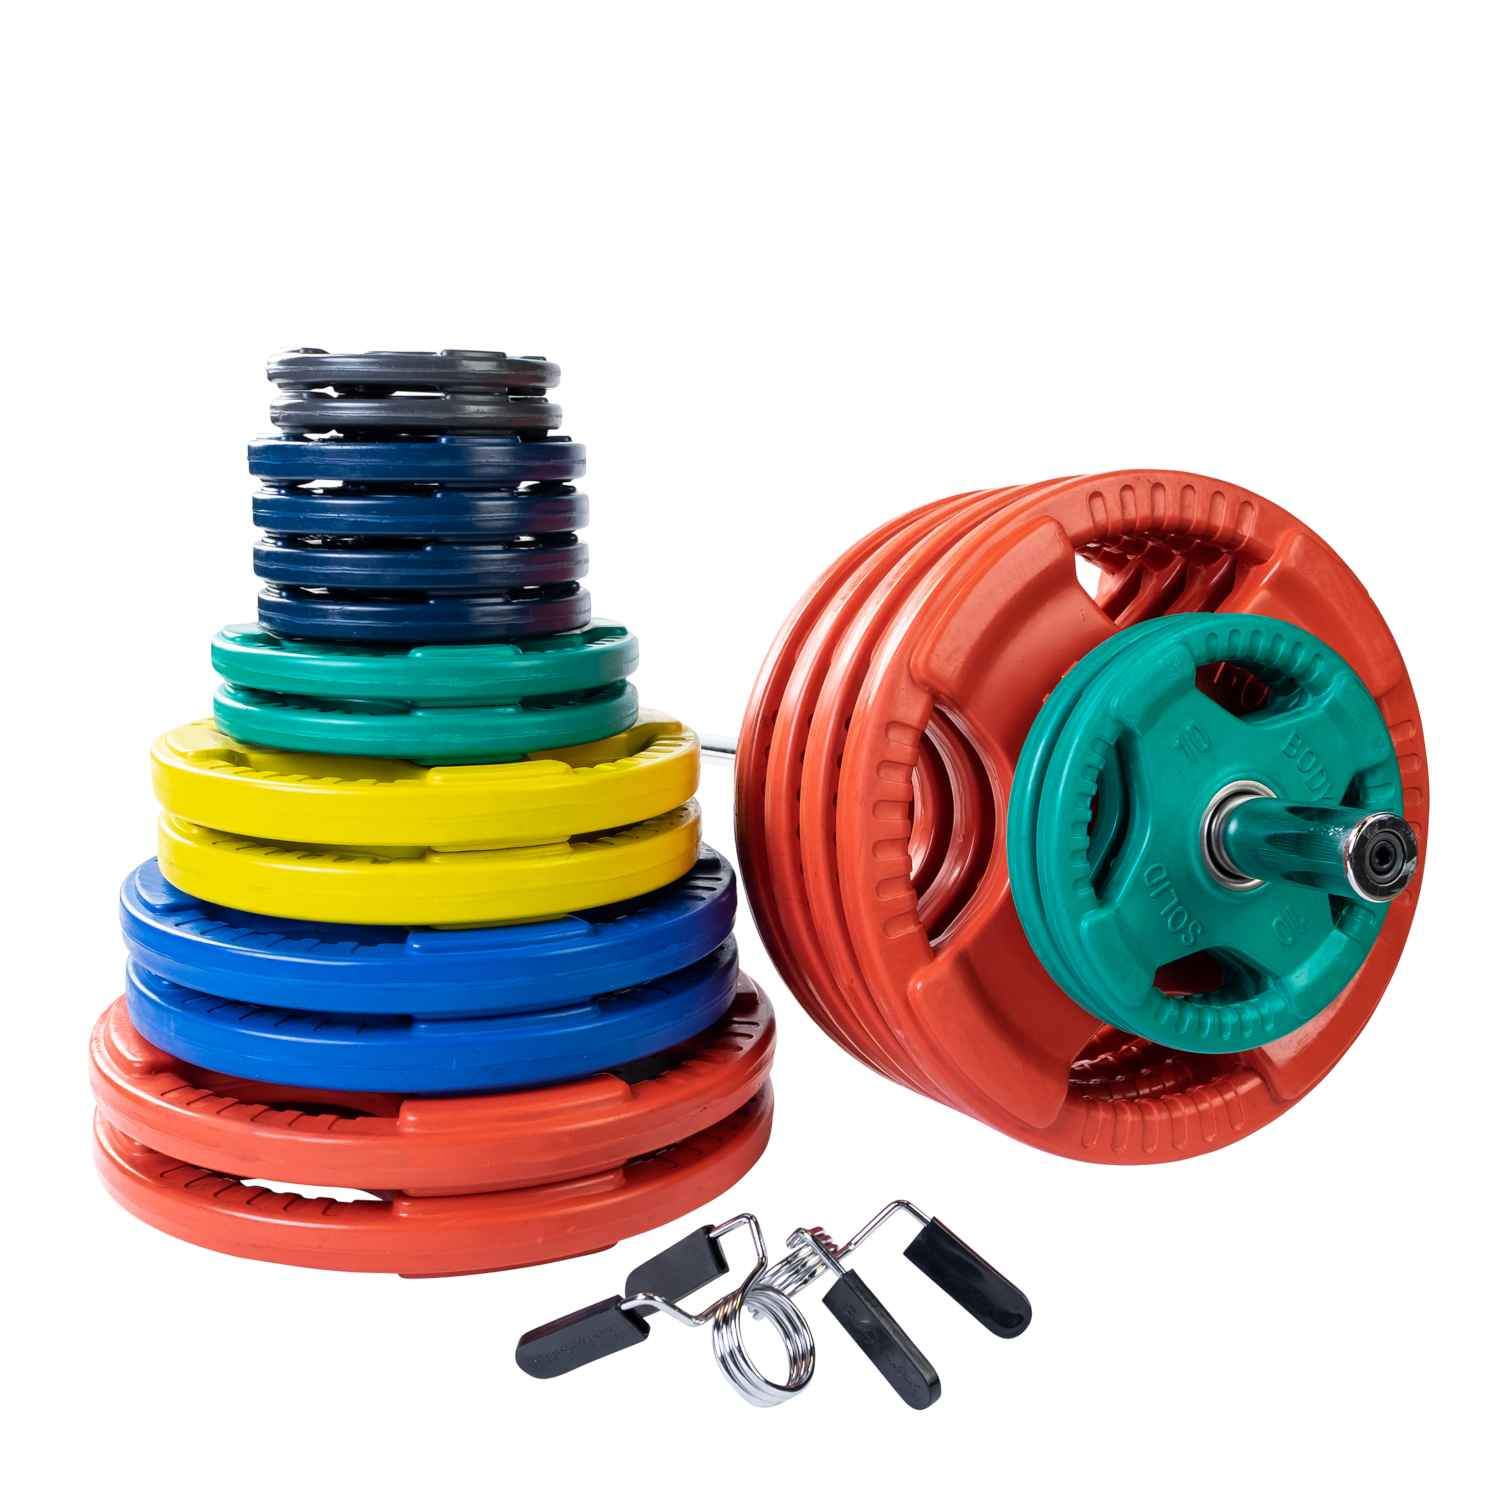 Body-Solid Colored Rubber Olympic Grip Plate Set With Chrome Bar and Collar plate Body-Solid Iron 500 lb 